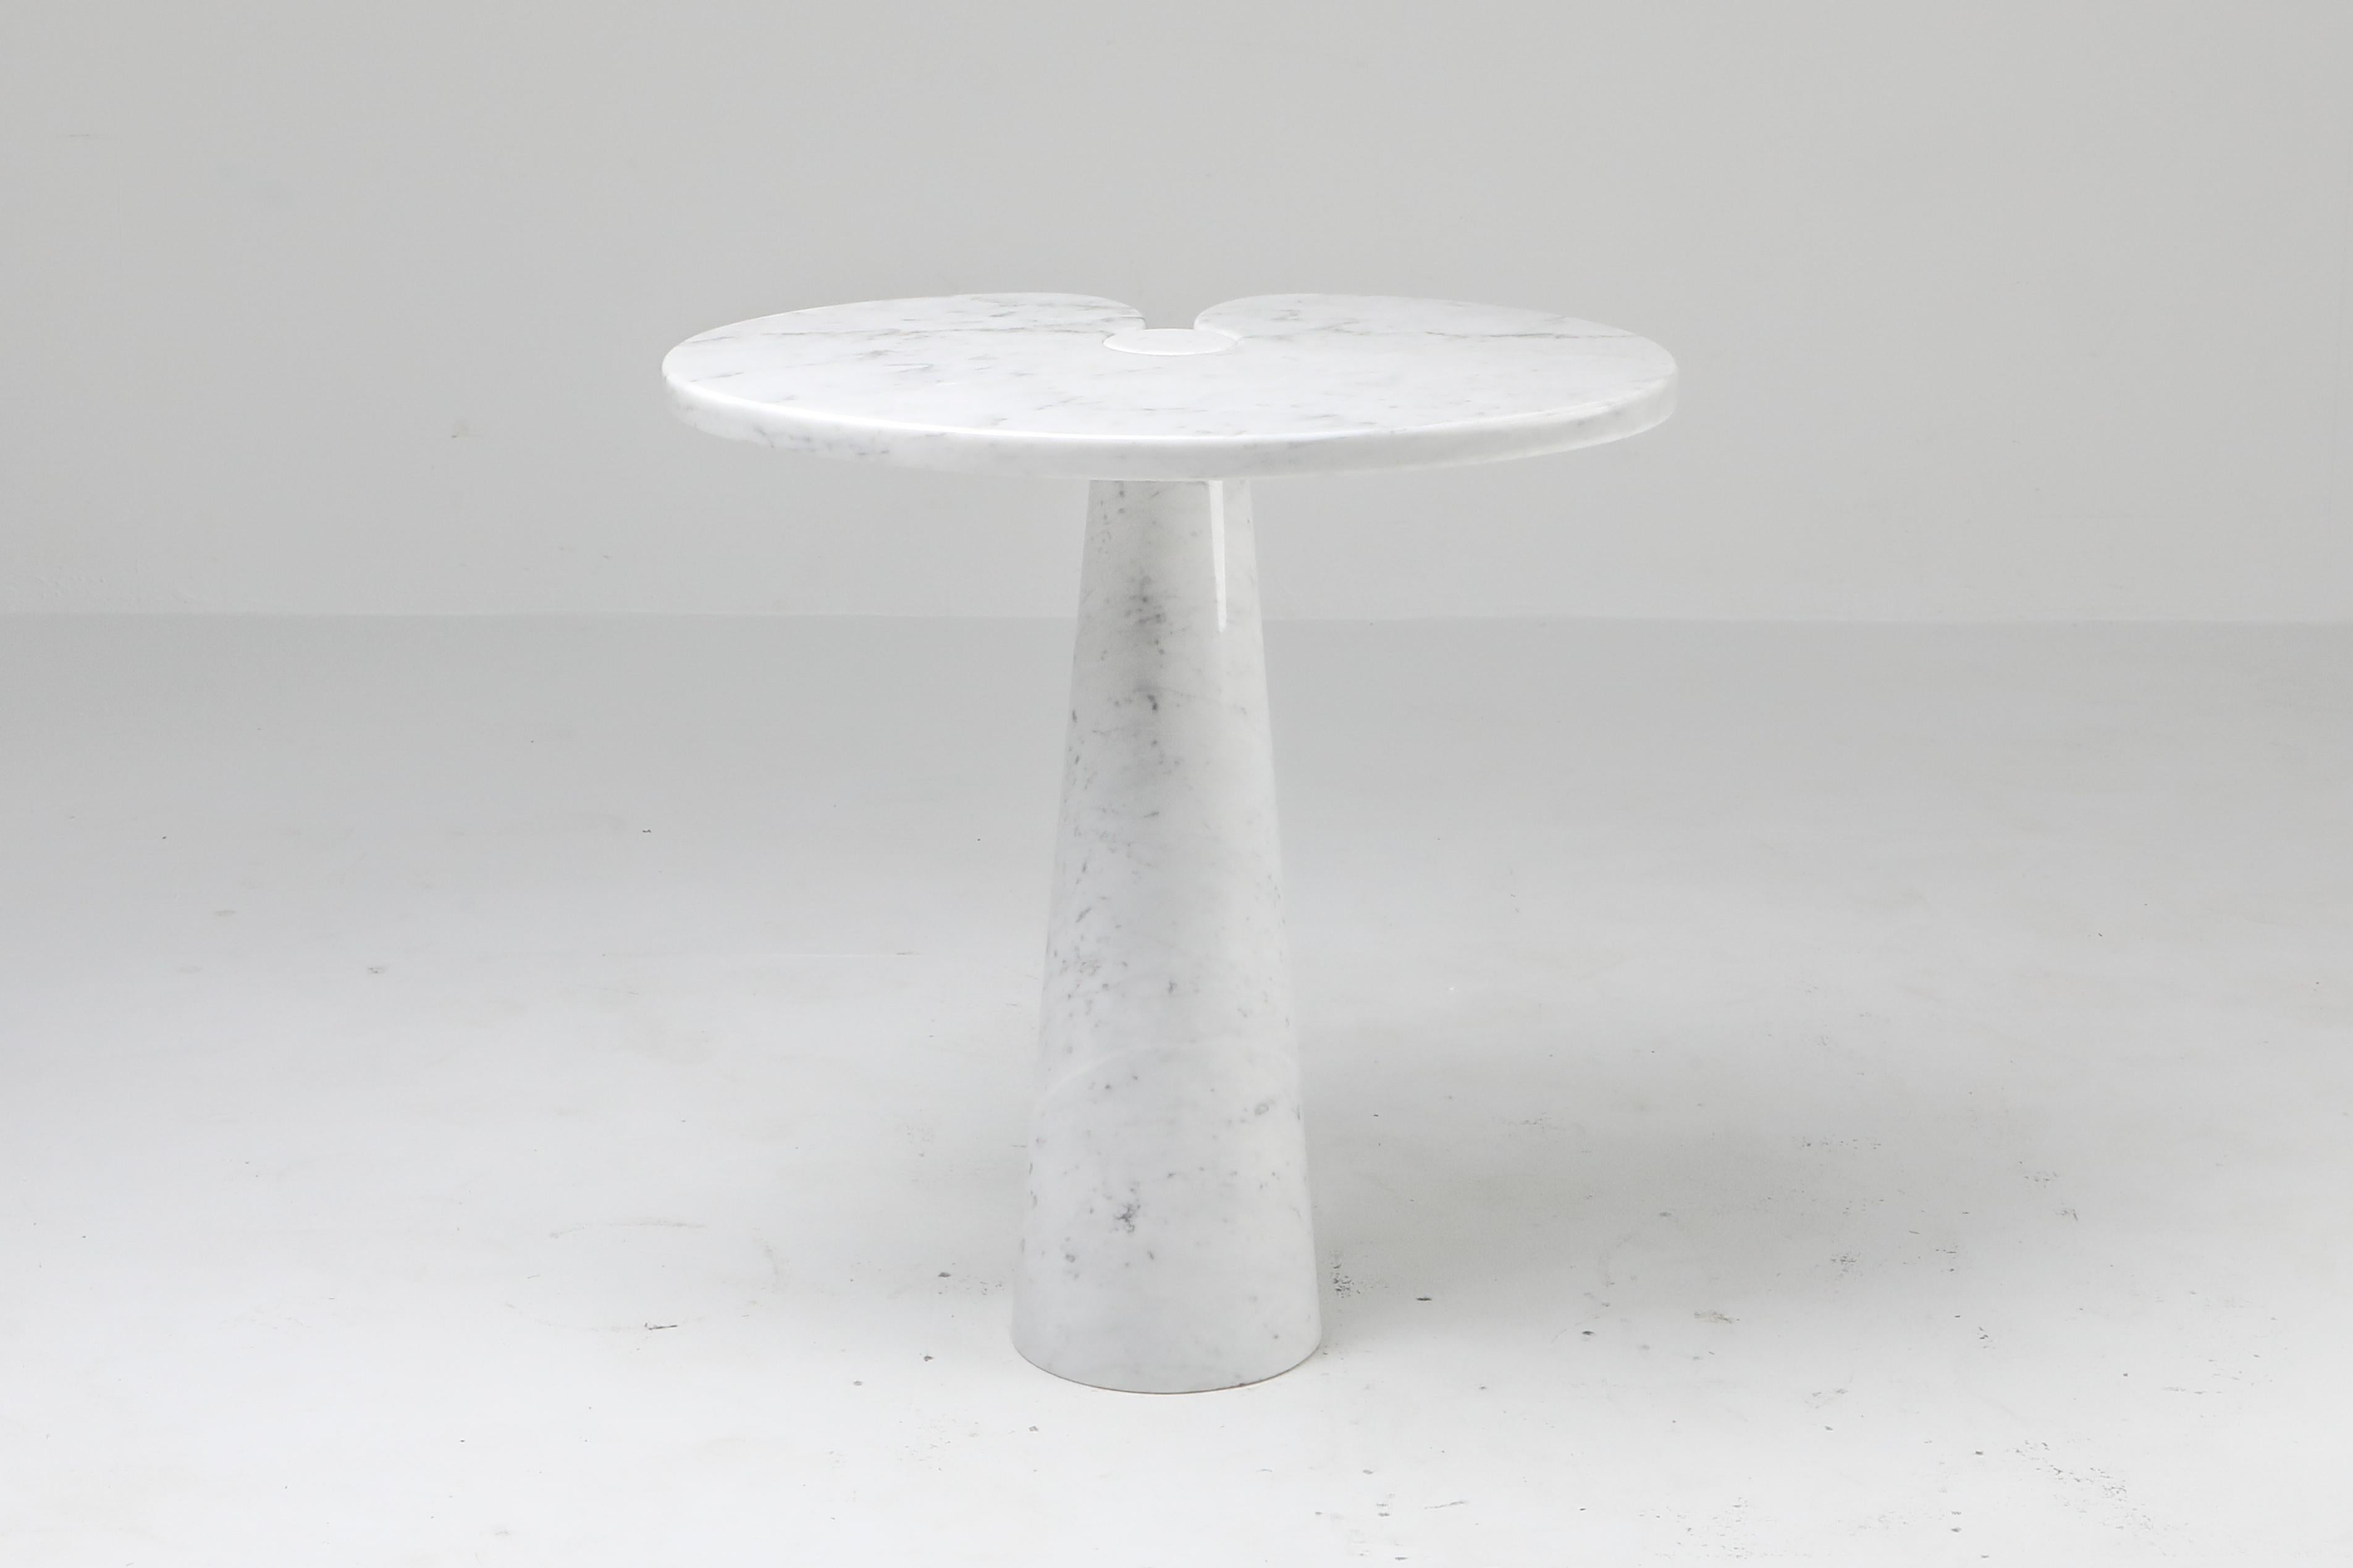 Angelo Mangiarotti, Eros Carrara marble side table or pedestal, Skipper Italy, 1970s

We have a lower version available in another listing
Angelo Mangiarotti made the most gorgeous post-modern tables in Italy, together with other greats such as